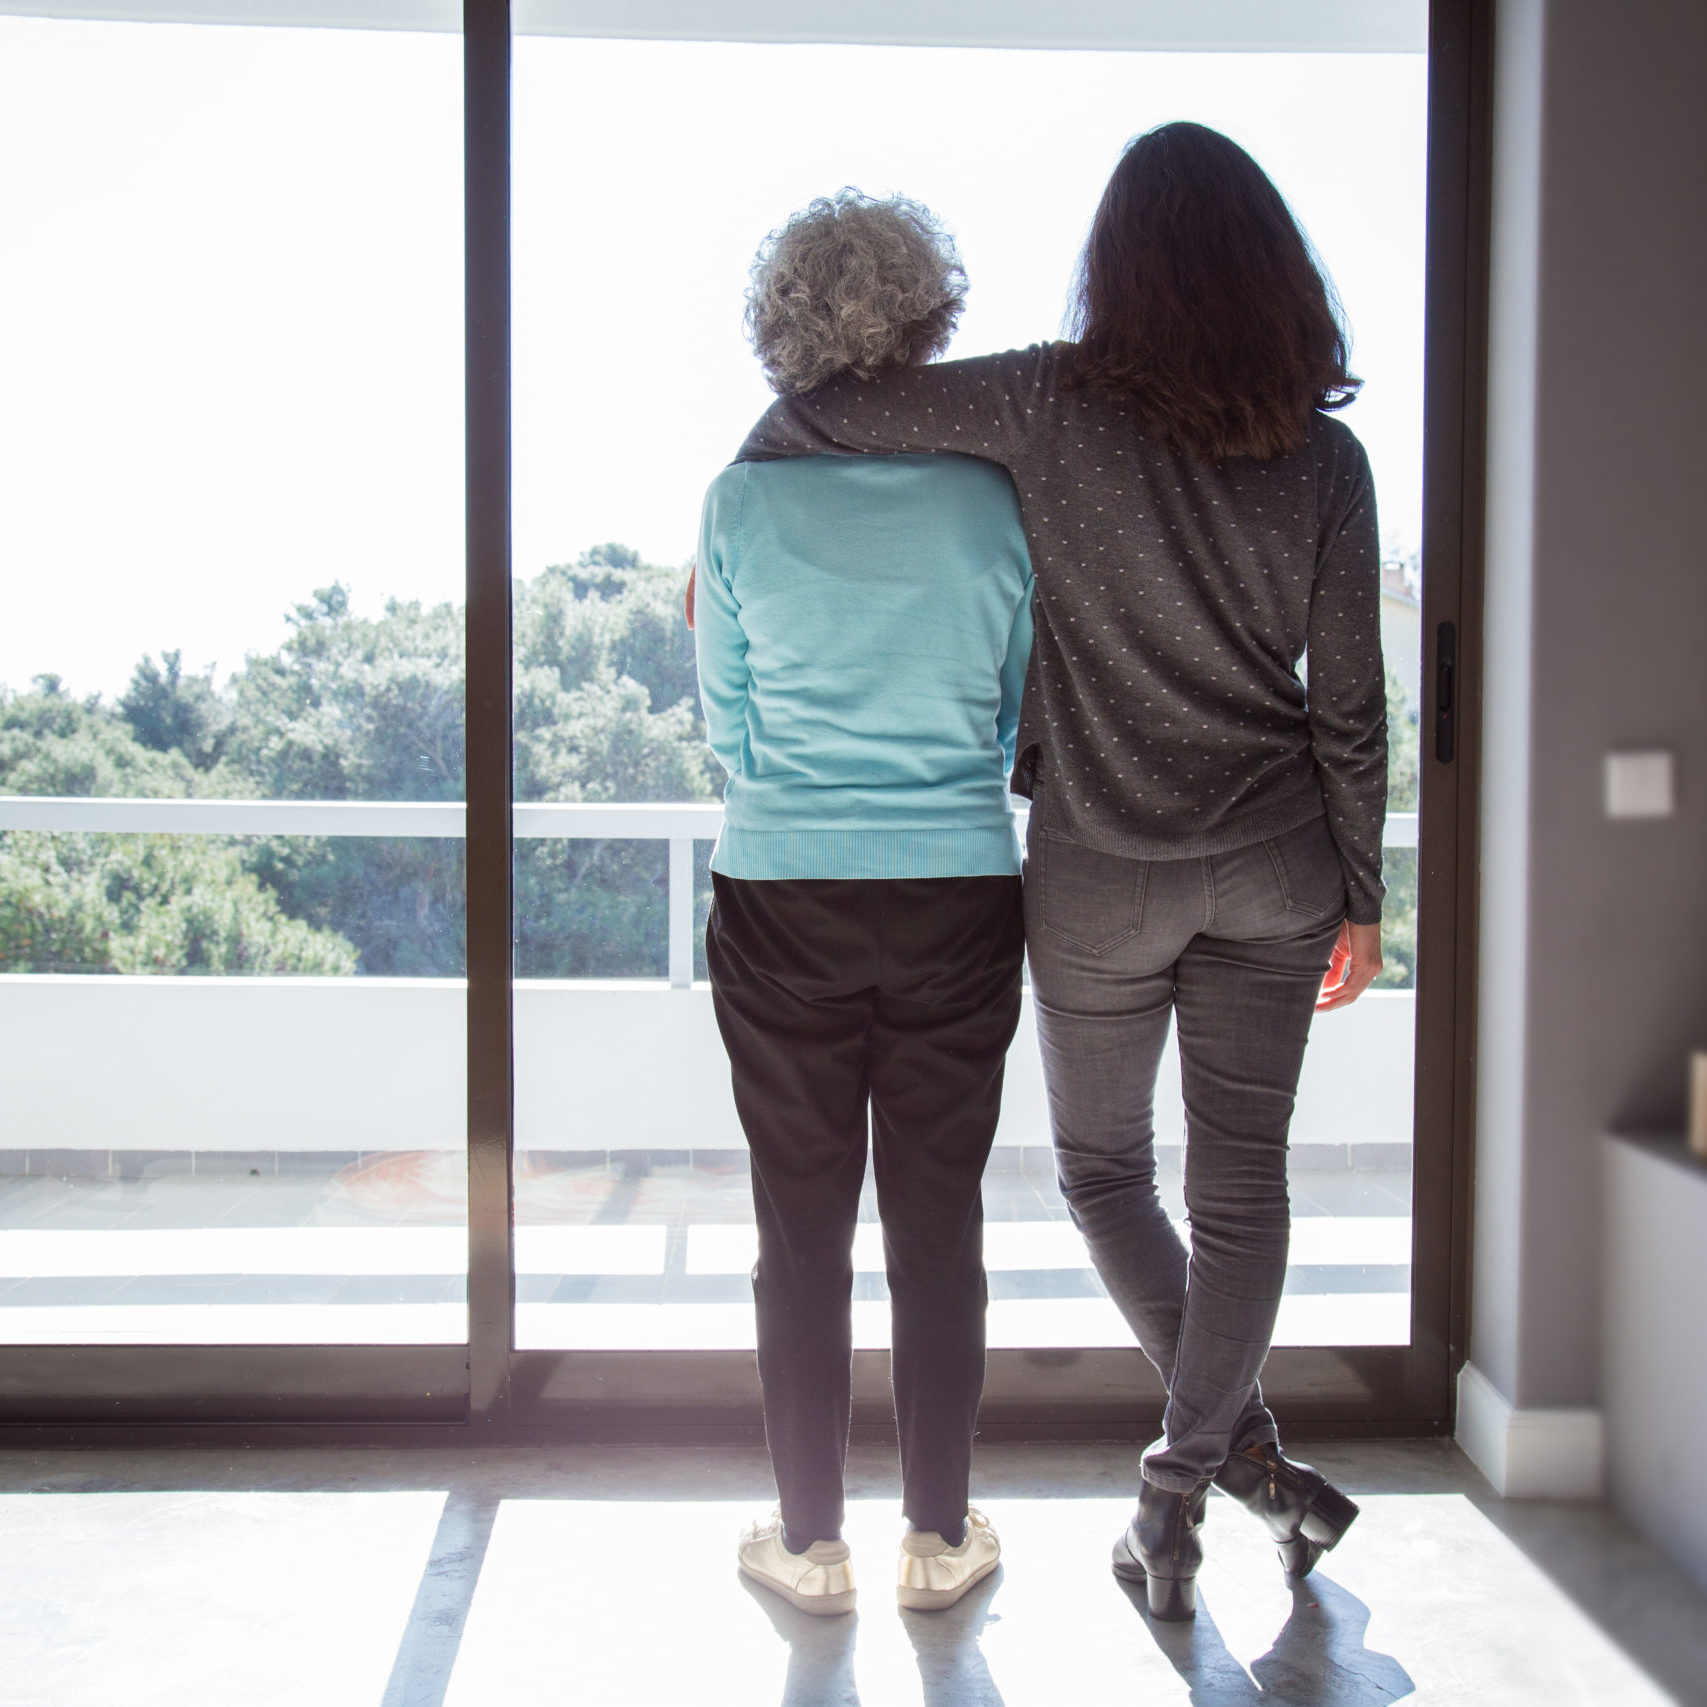 Girl visiting grandma. Back view of young and elderly women standing and looking out window. Family and taking care concept